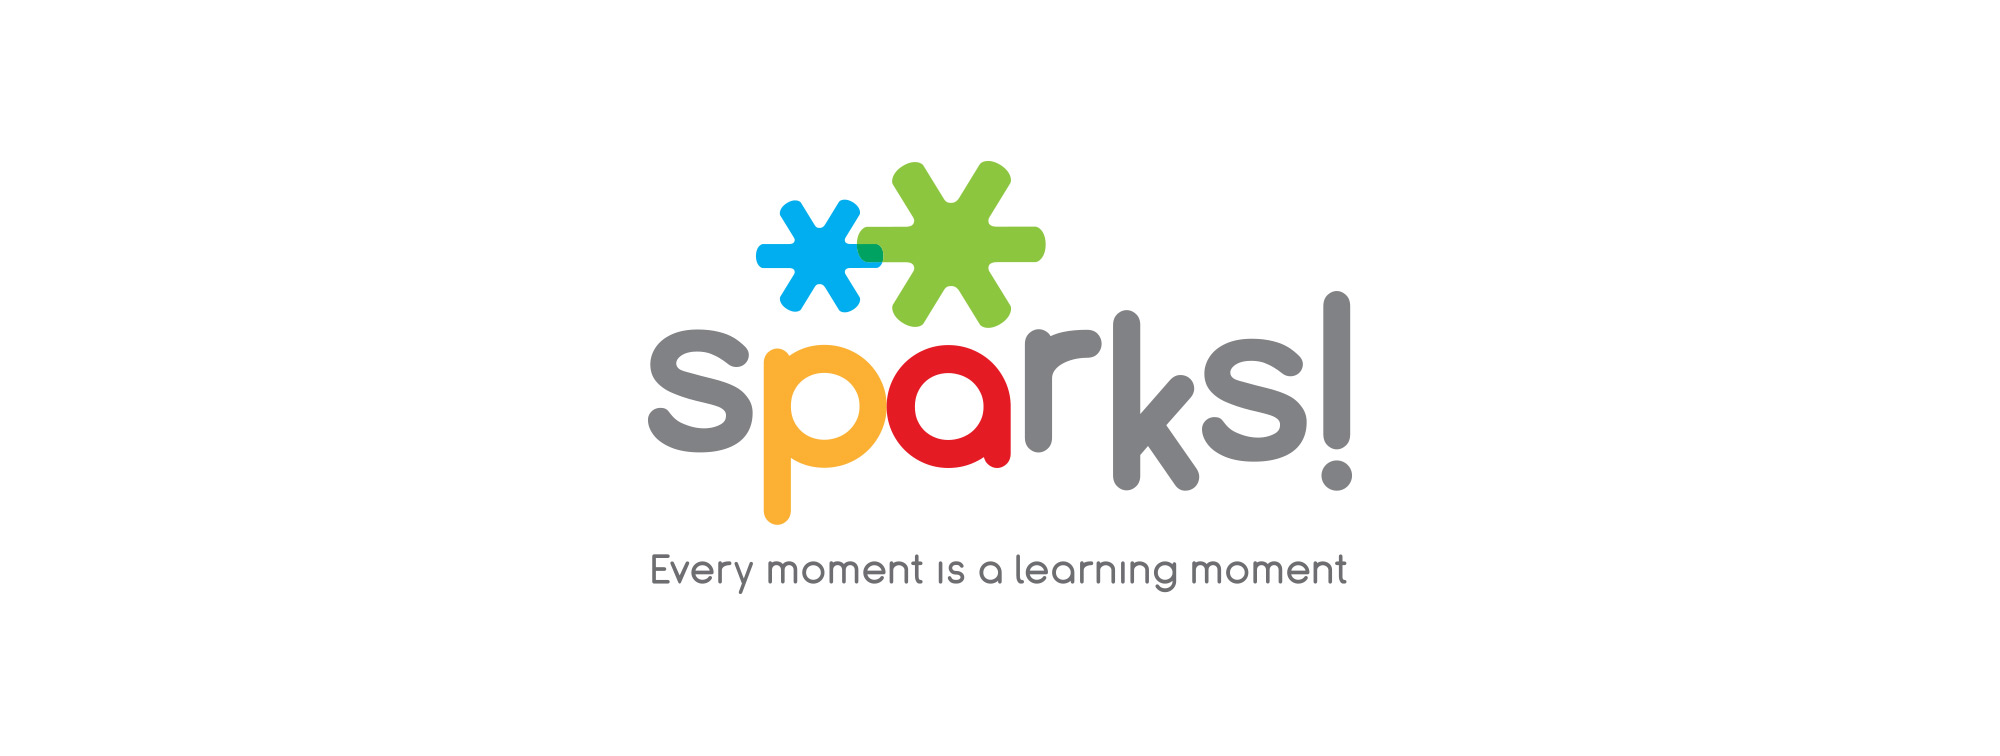 The sparks! four-color brand logo and tagline that reads Every moment is a learning moment